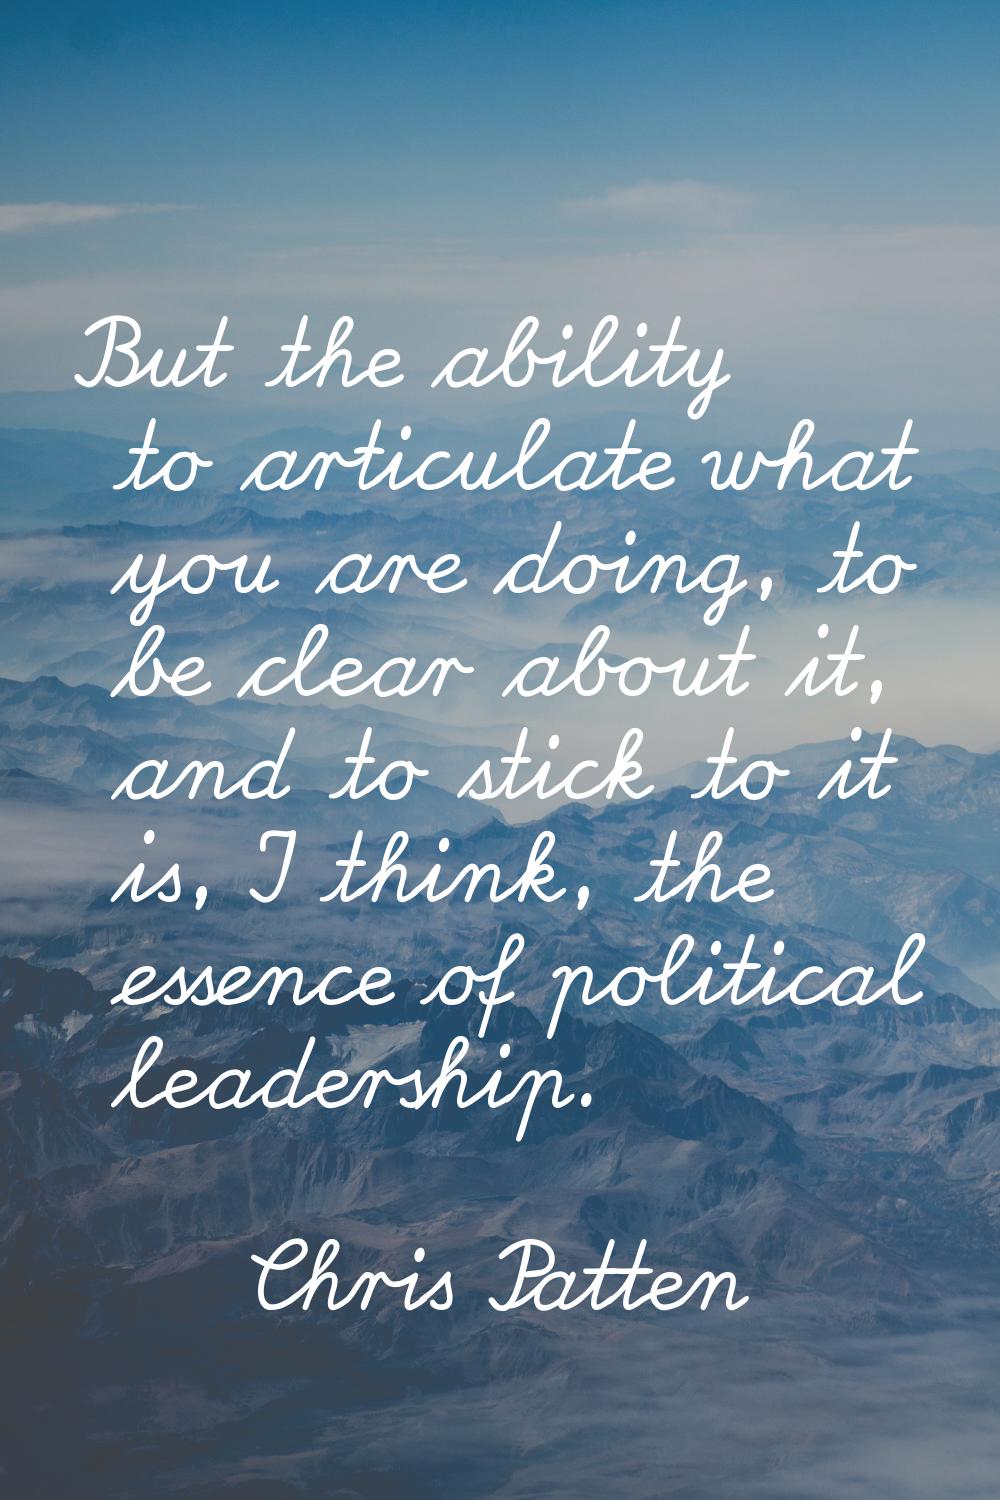 But the ability to articulate what you are doing, to be clear about it, and to stick to it is, I th